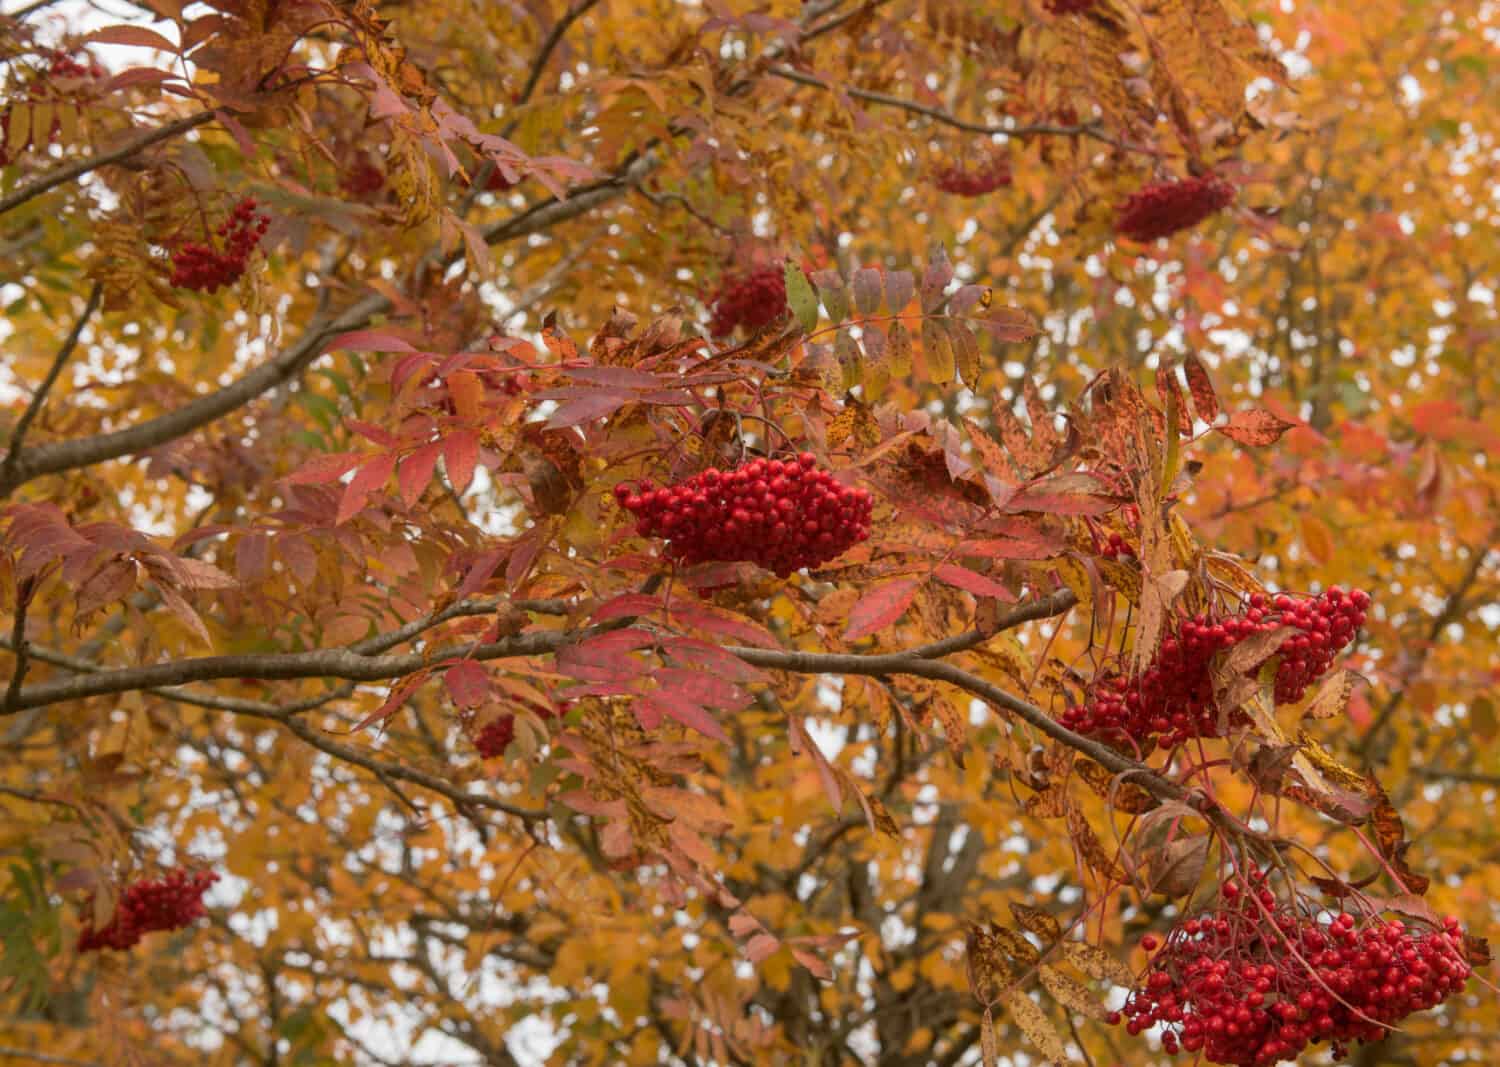 Autumn Foliage and Red Berries of an American Mountain Ash Tree (Sorbus americana) in a Woodland Garden